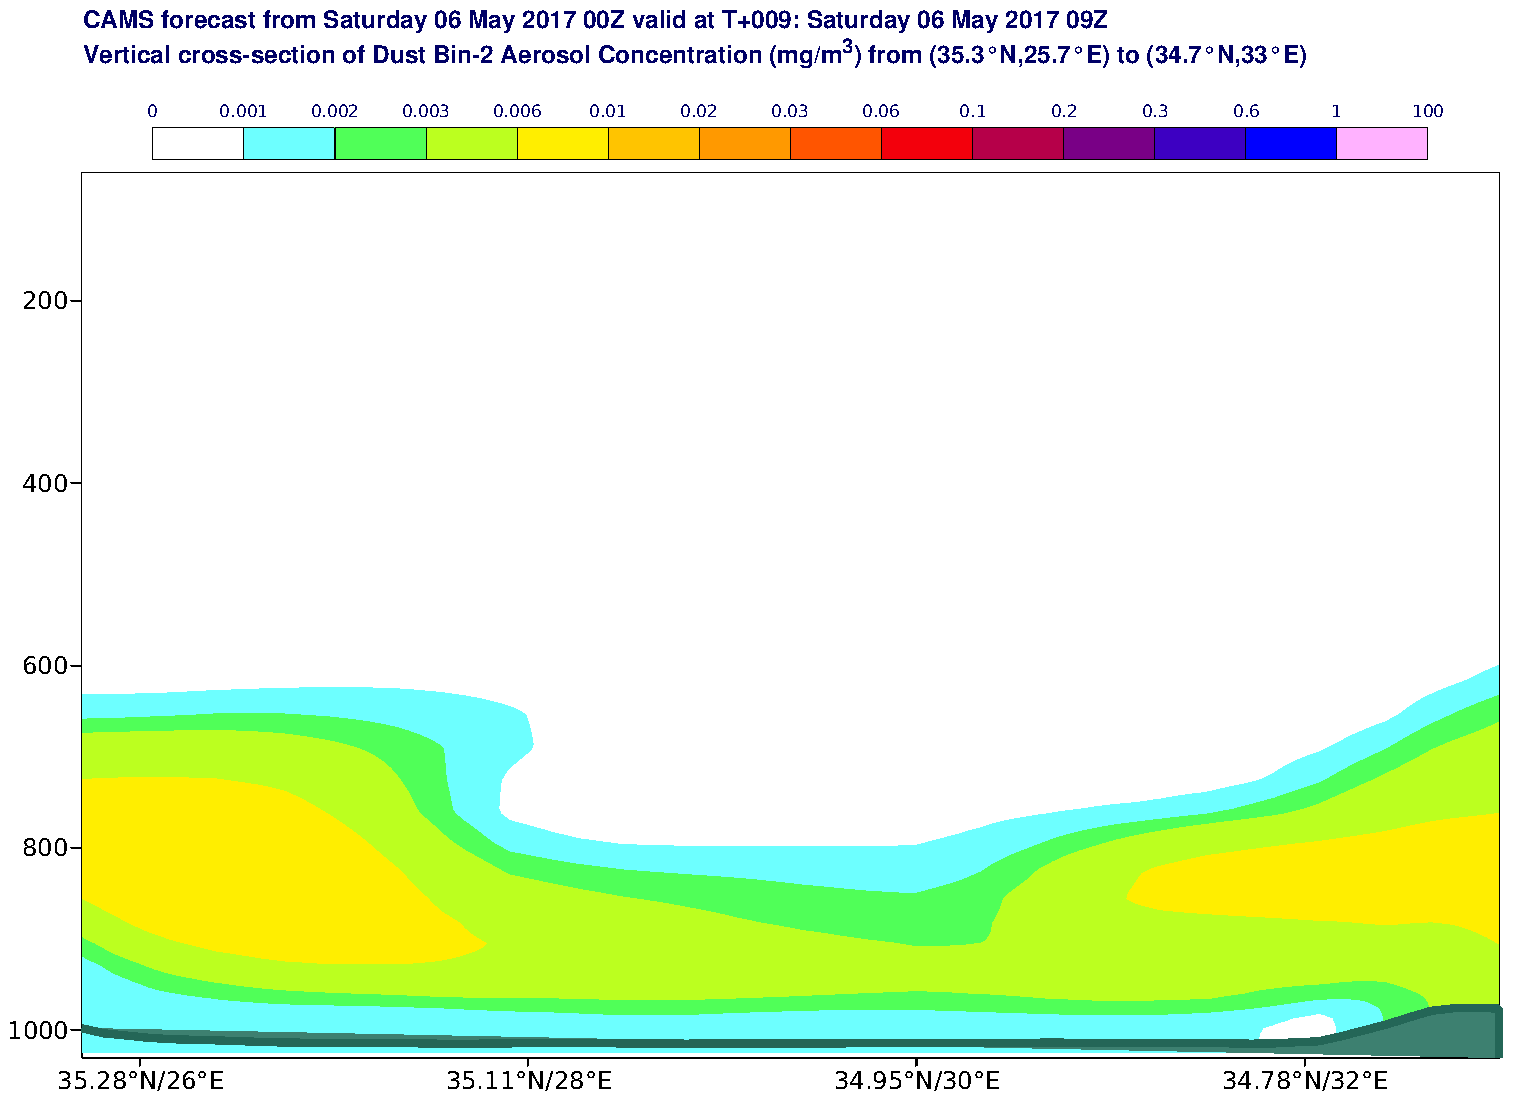 Vertical cross-section of Dust Bin-2 Aerosol Concentration (mg/m3) valid at T9 - 2017-05-06 09:00